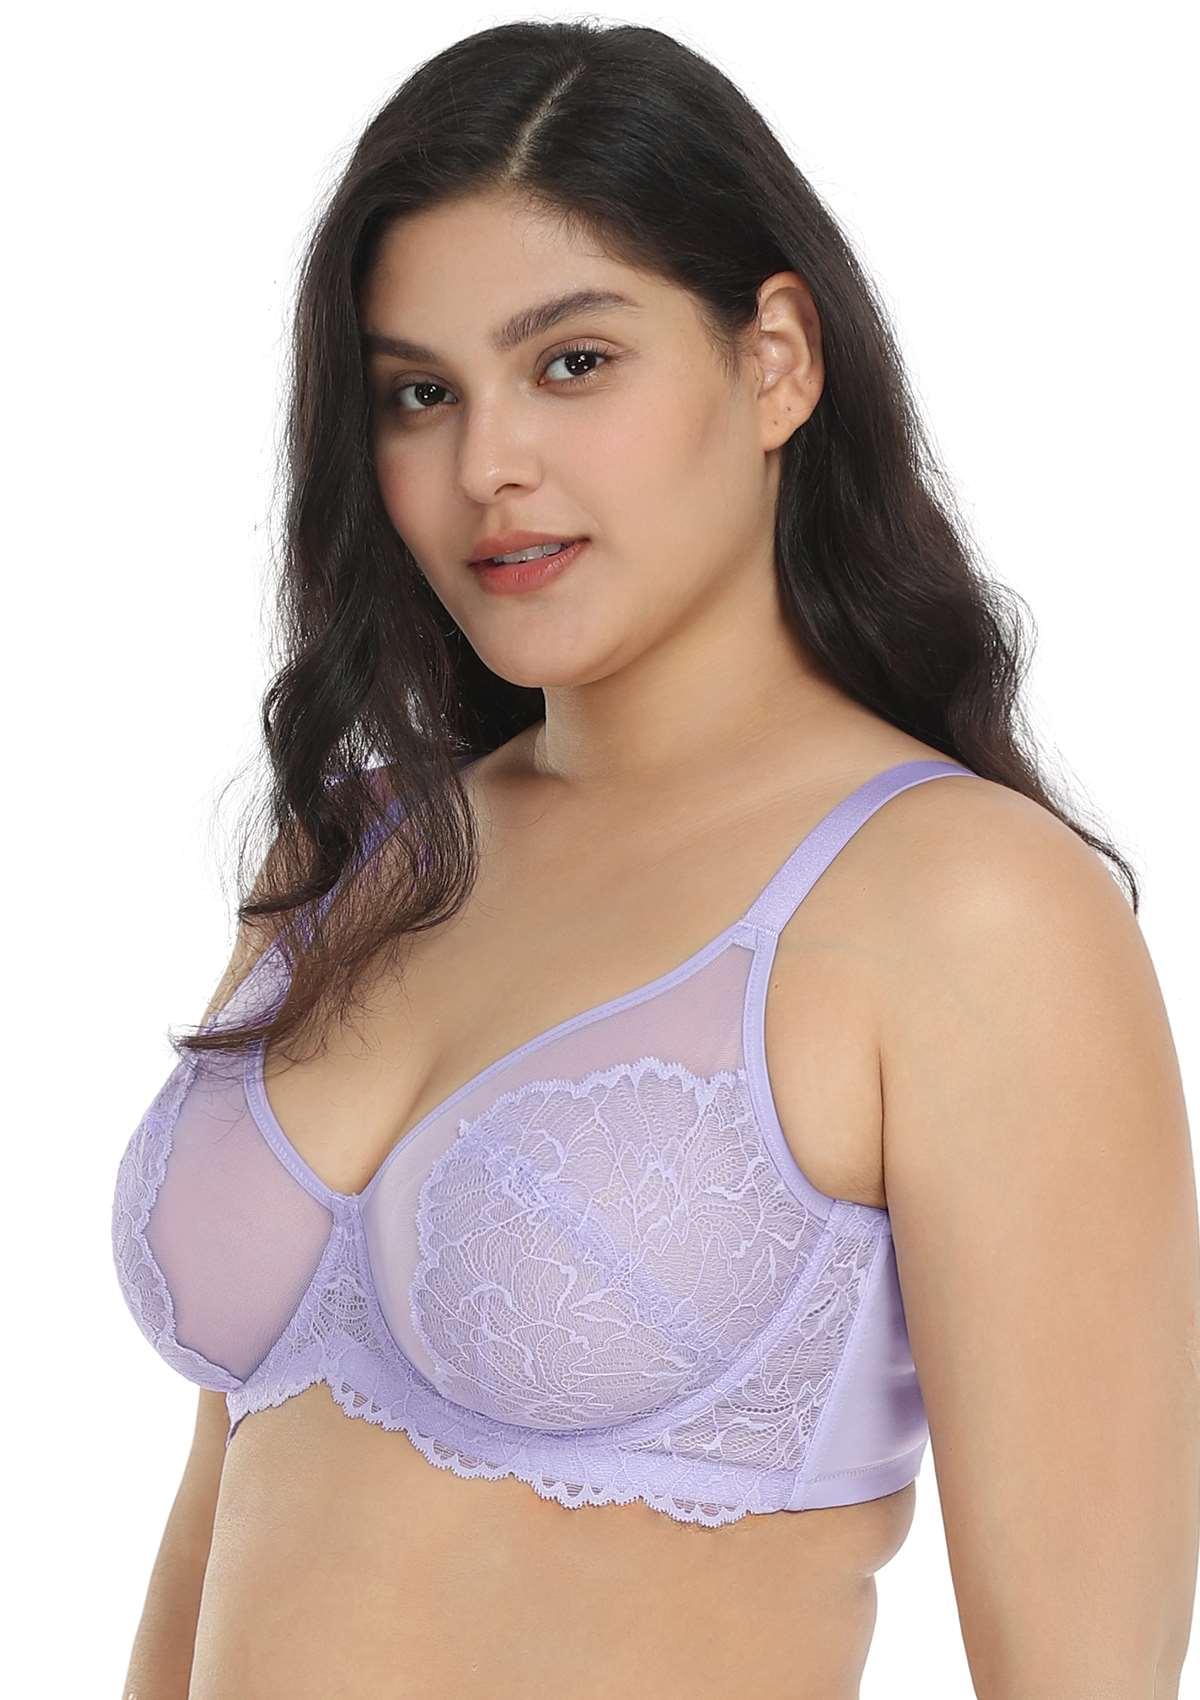 HSIA Blossom Transparent Lace Bra: Plus Size Wired Back Smoothing Bra - Purple / 34 / DDD/F